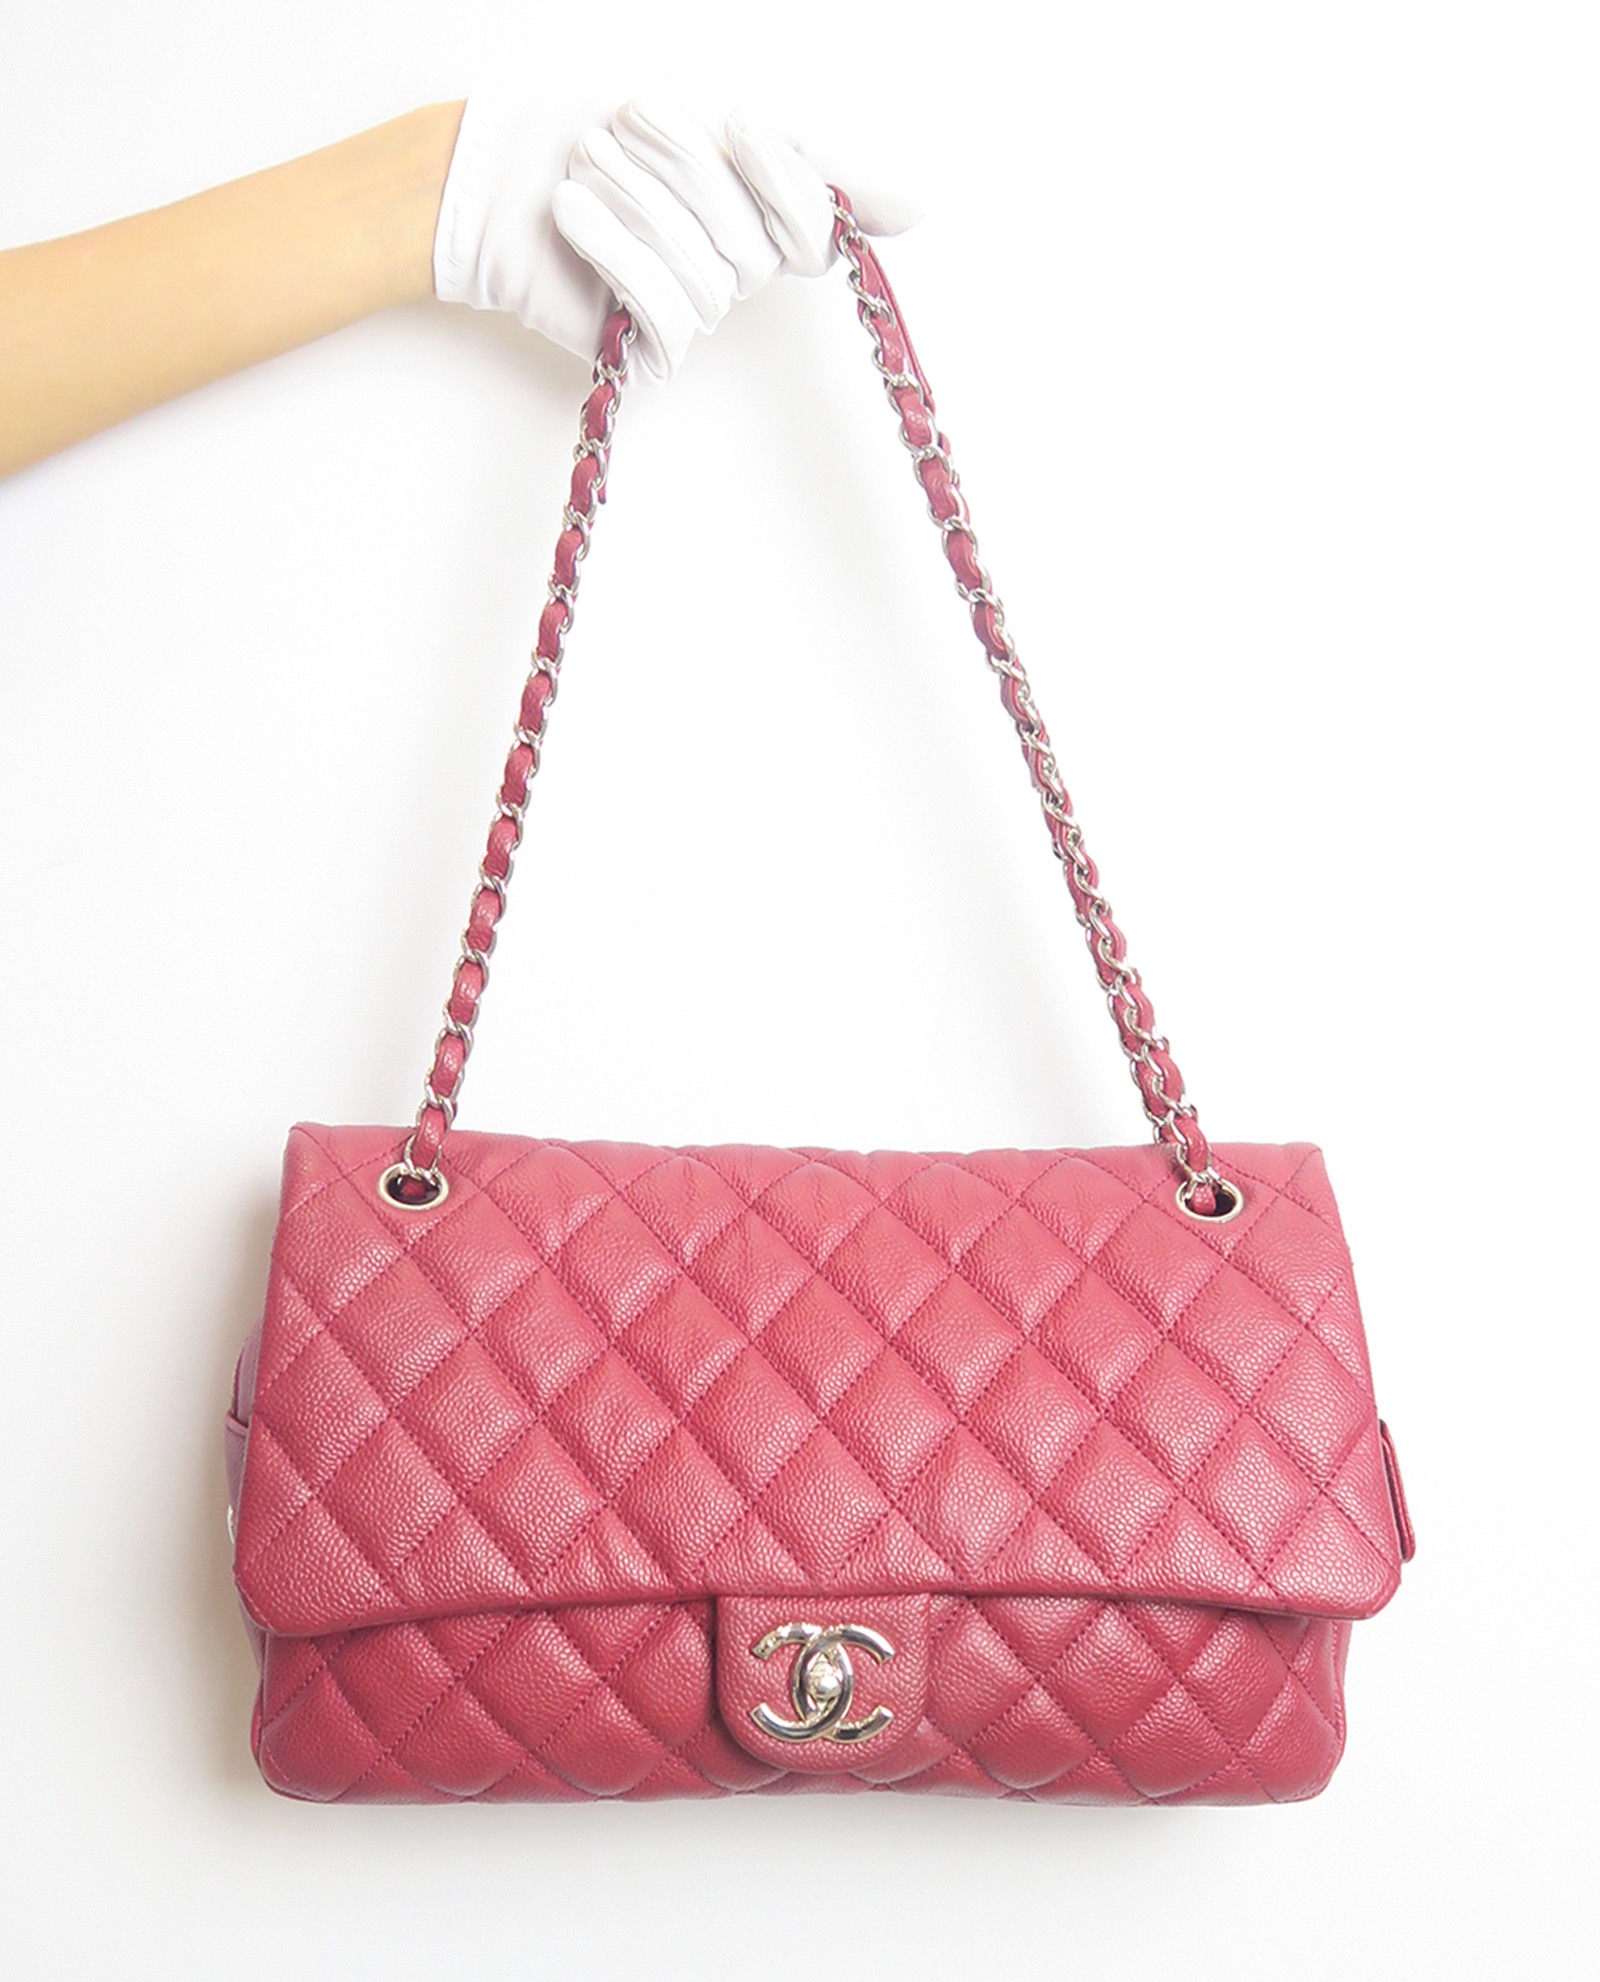 Mono - Luxury Handbag Accessories - Our Chanel Easy Flap Liner in Pale Pink  with Red Glitter Heart ❤️